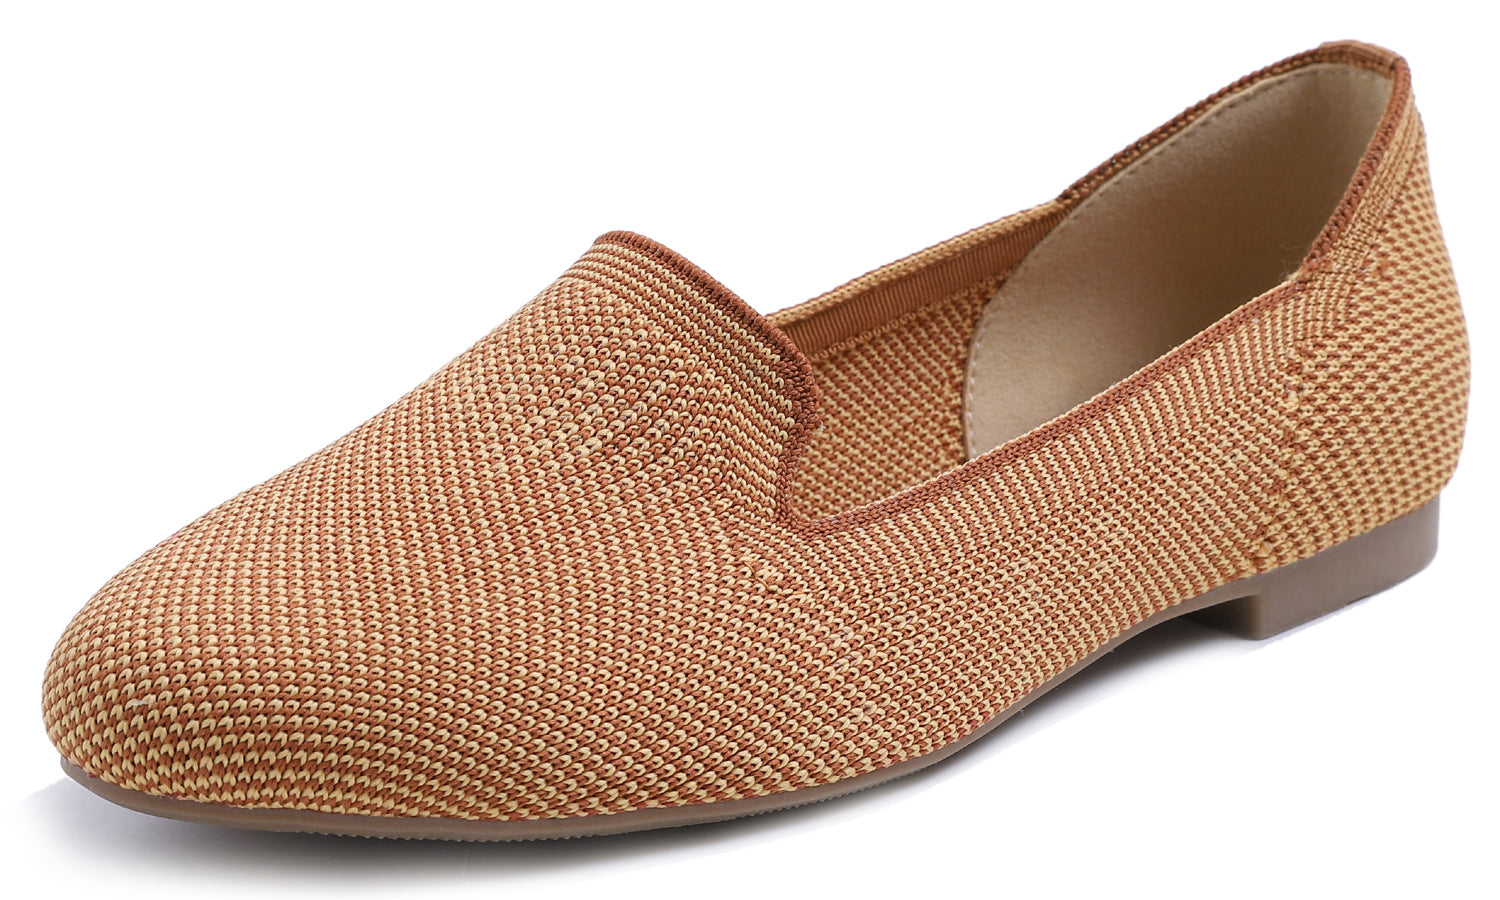 Feversole Women's Woven Fashion Breathable Knit Flat Shoes Tan Mixed Loafer